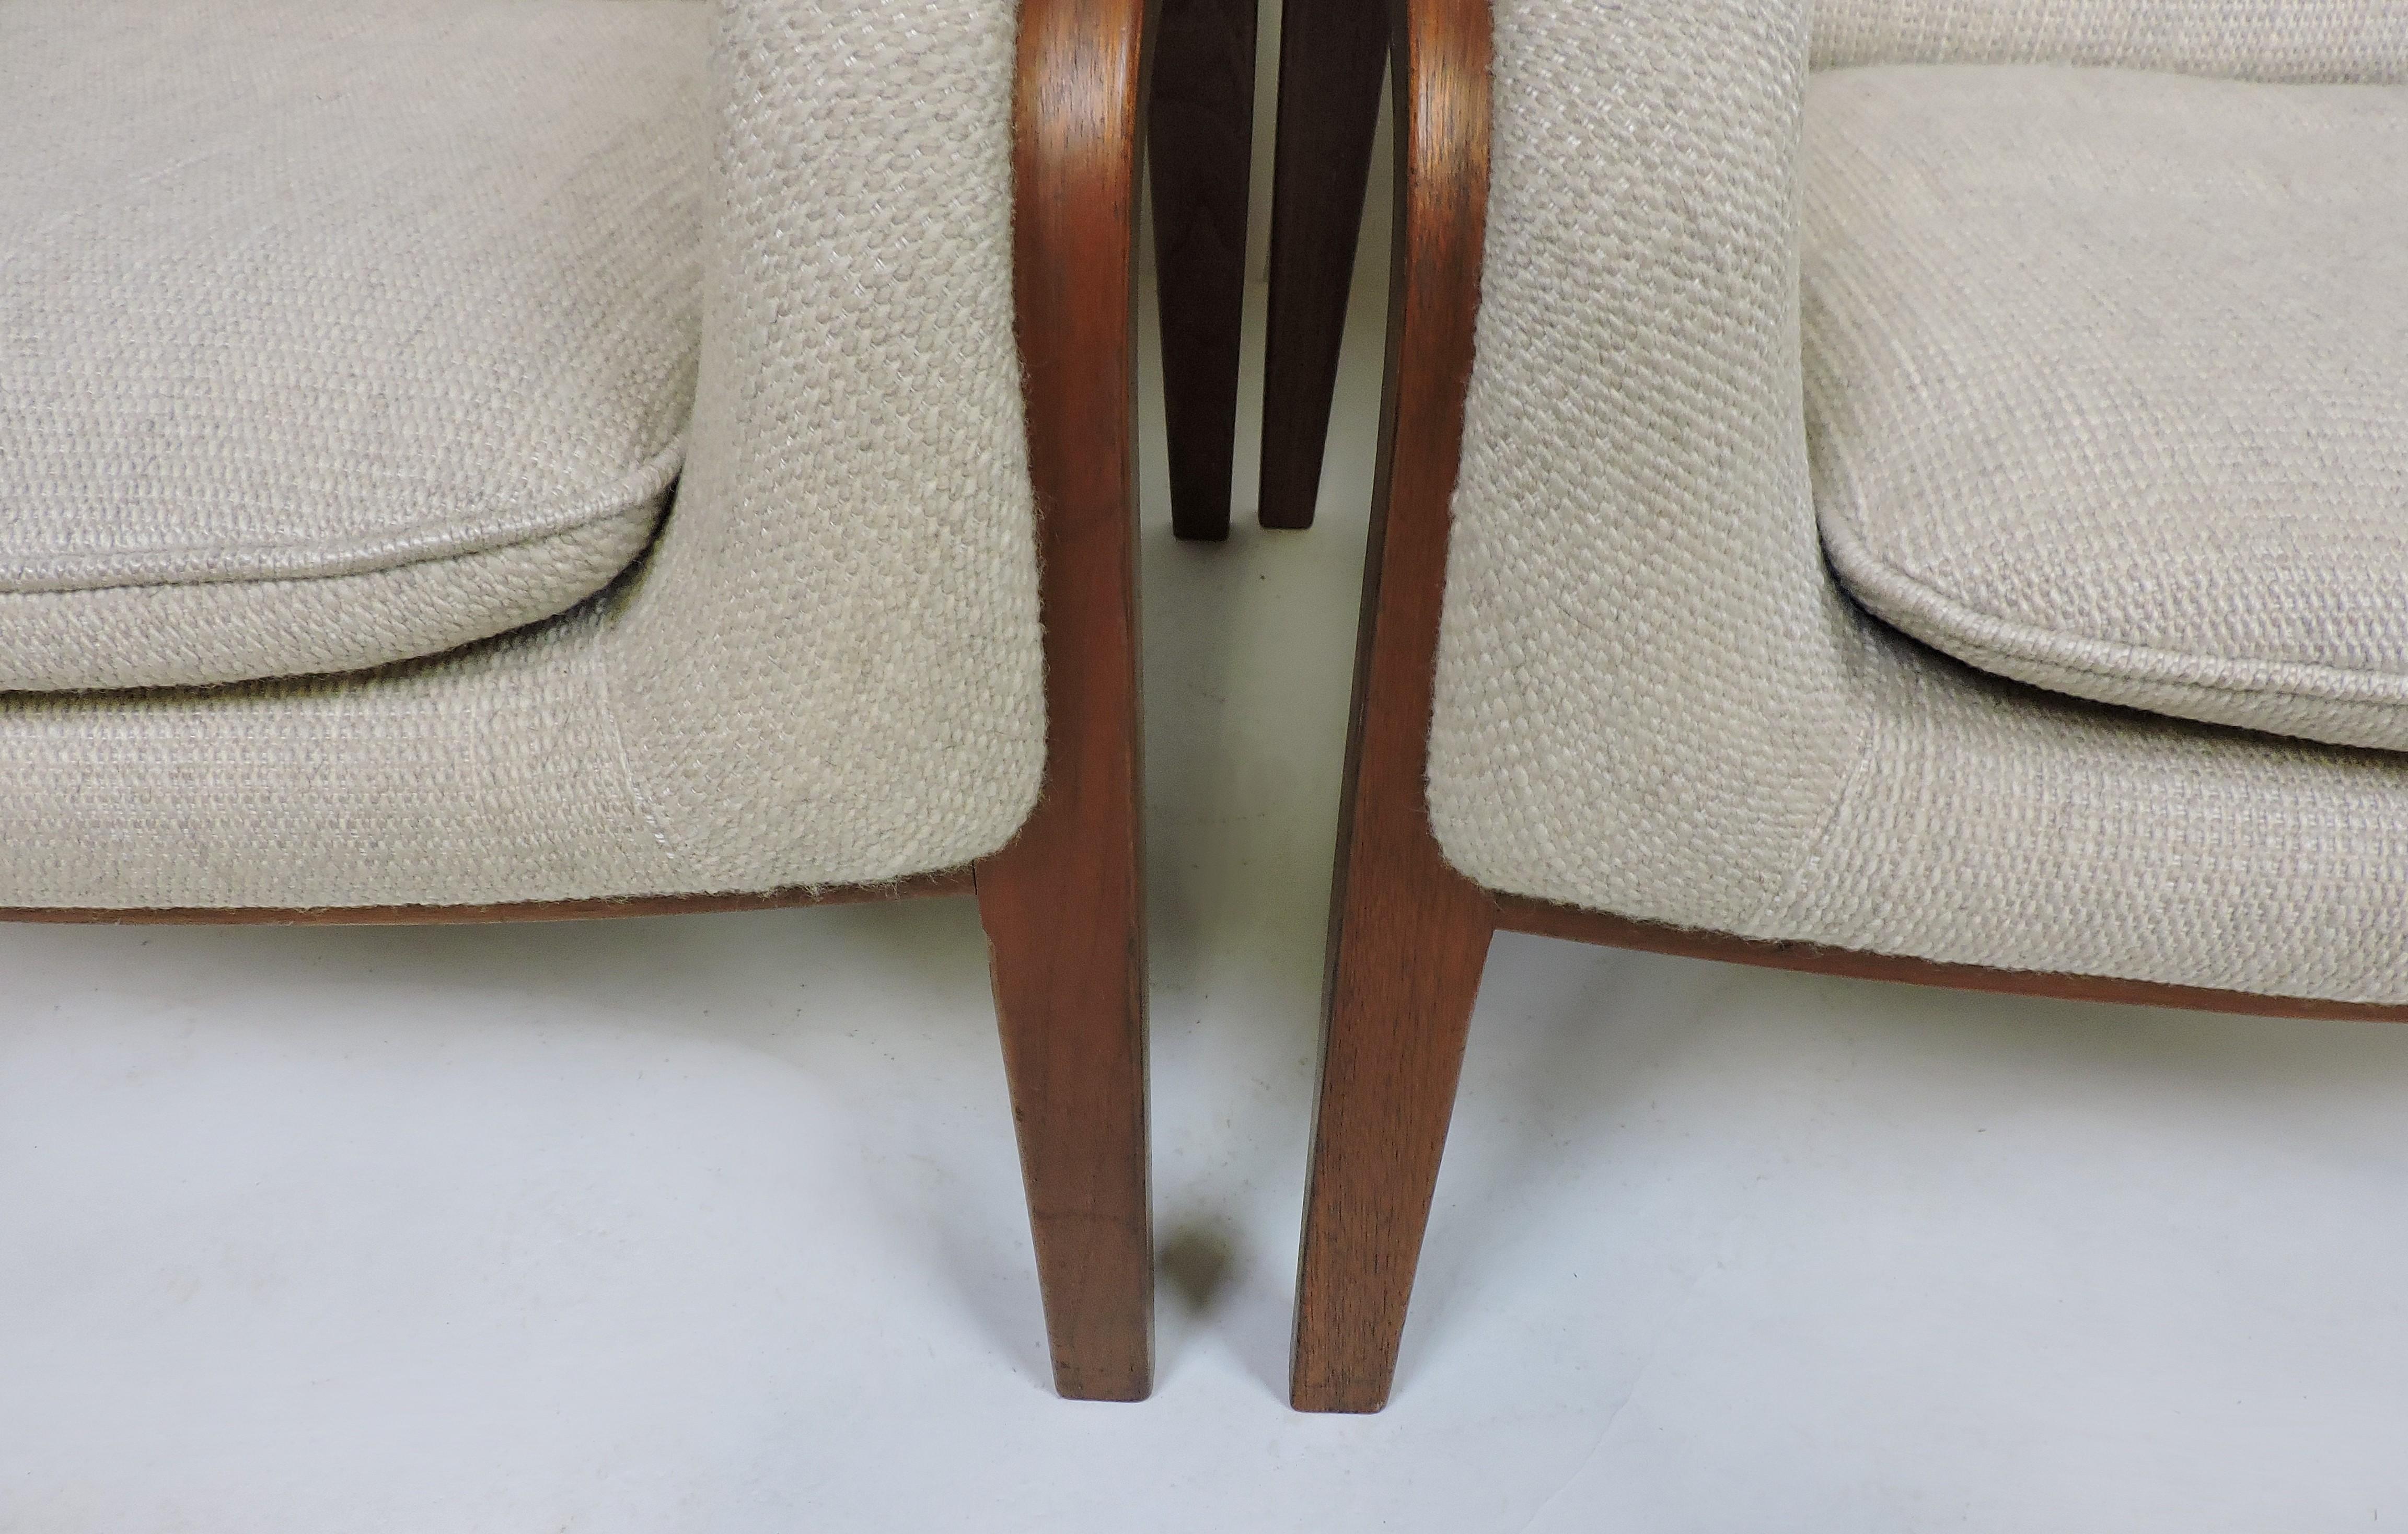 Fabric Pair of Bill Stephens Mid-Century Modern Bentwood Lounge Chairs for Knoll